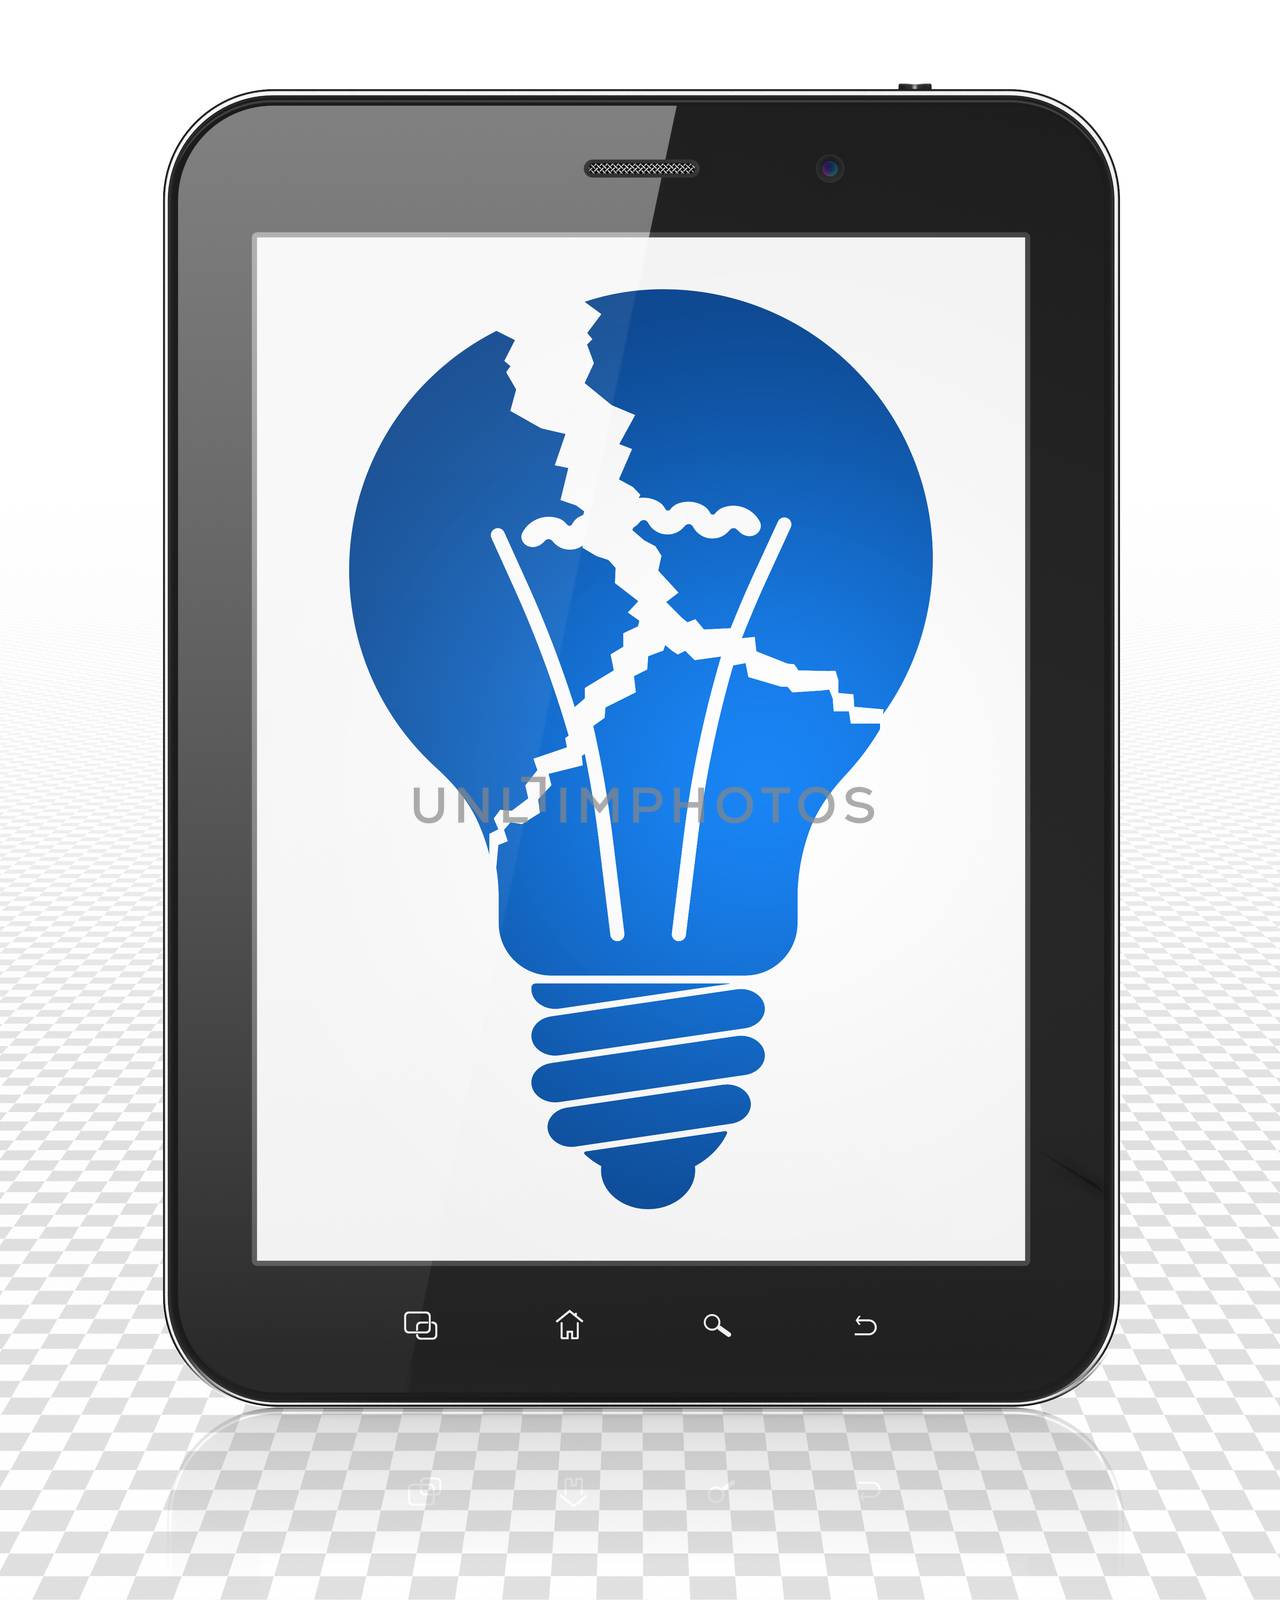 Finance concept: Tablet Pc Computer with blue Light Bulb icon on display